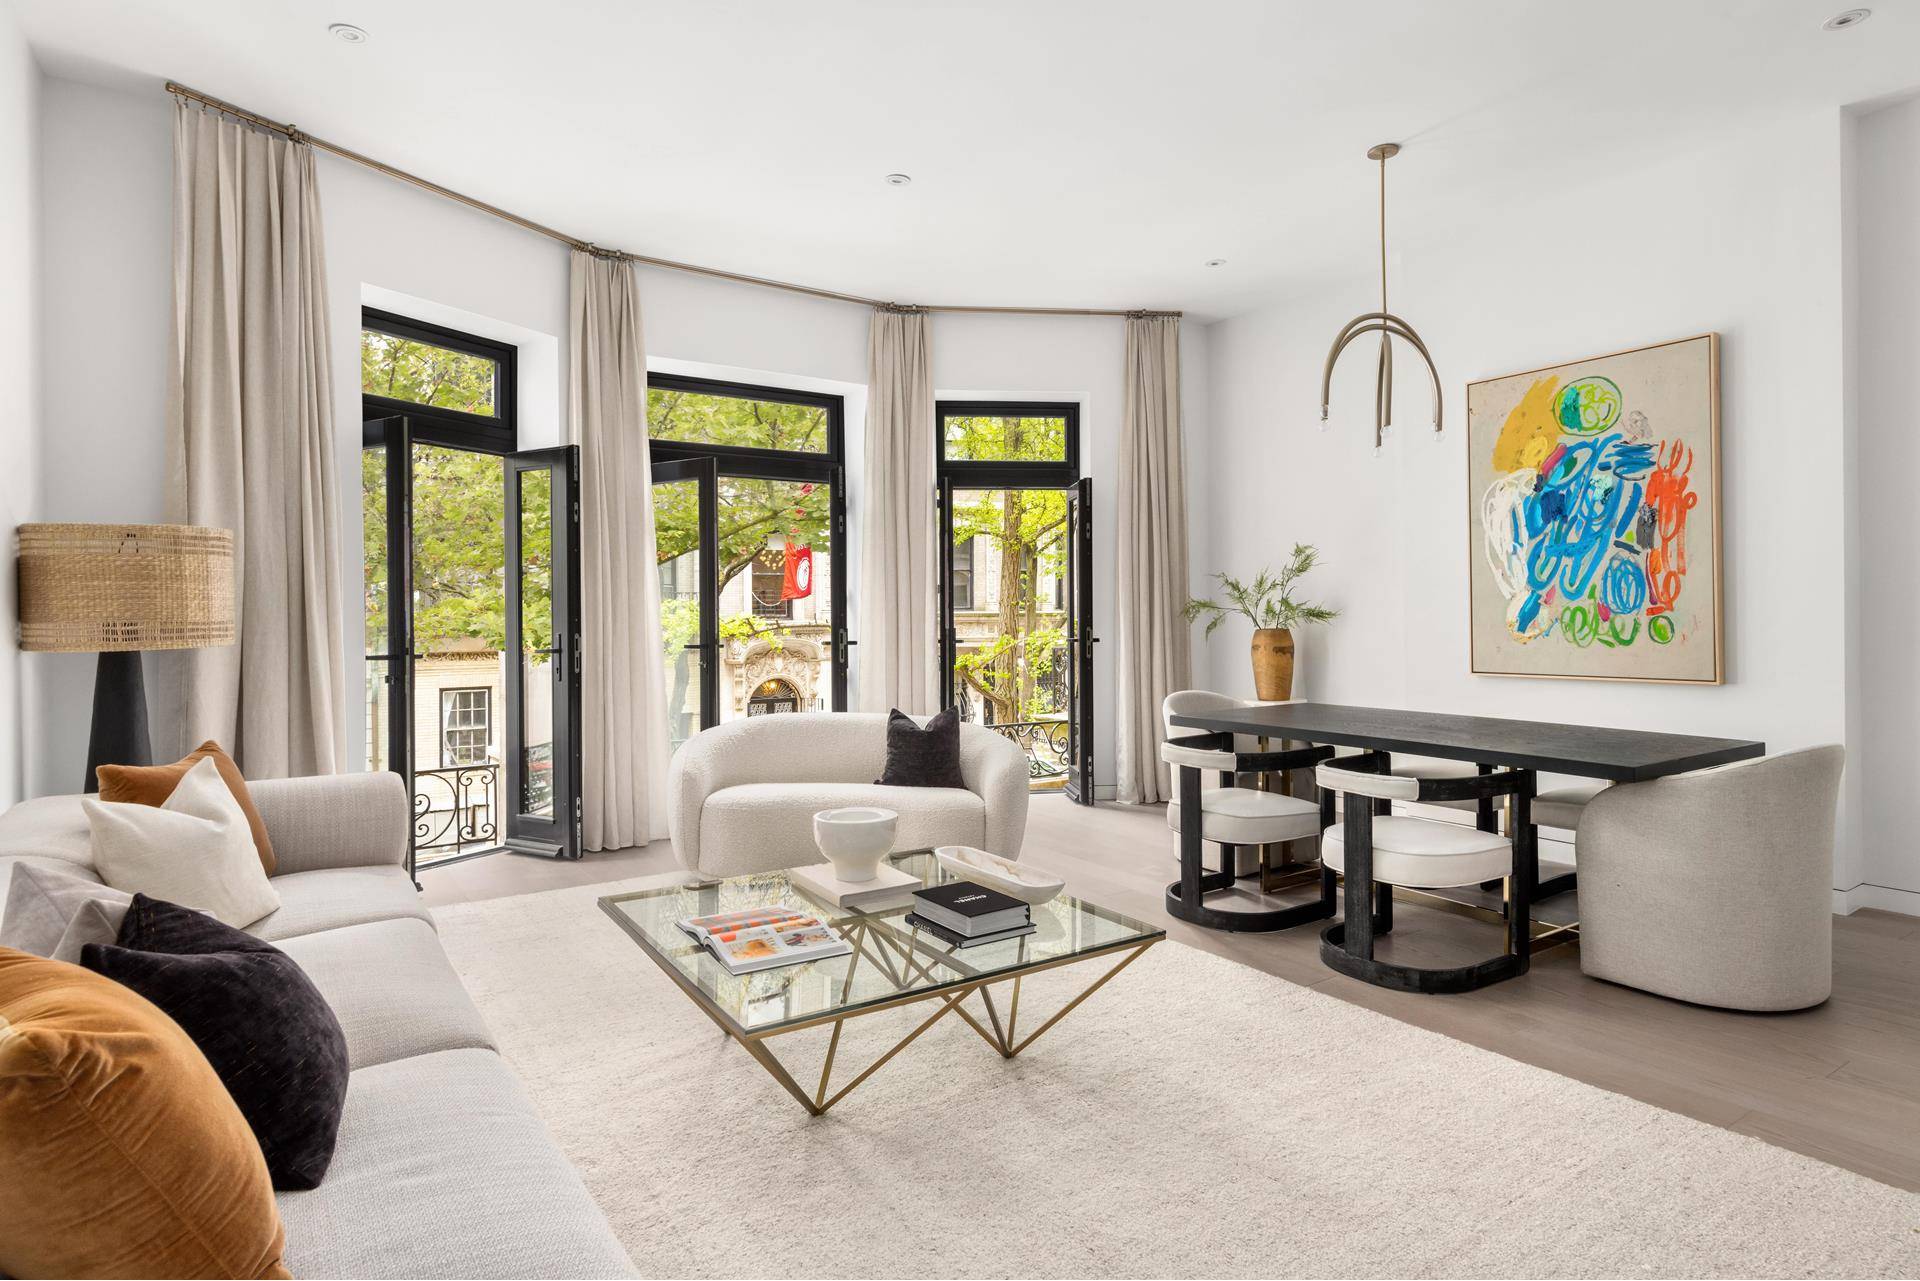 Residence 22 is a meticulously conceived 2 bedroom, 2 bathroom residence comprising over 1, 305 interior square feet, offering an attention to detail rarely found in a historic condominium conversion.